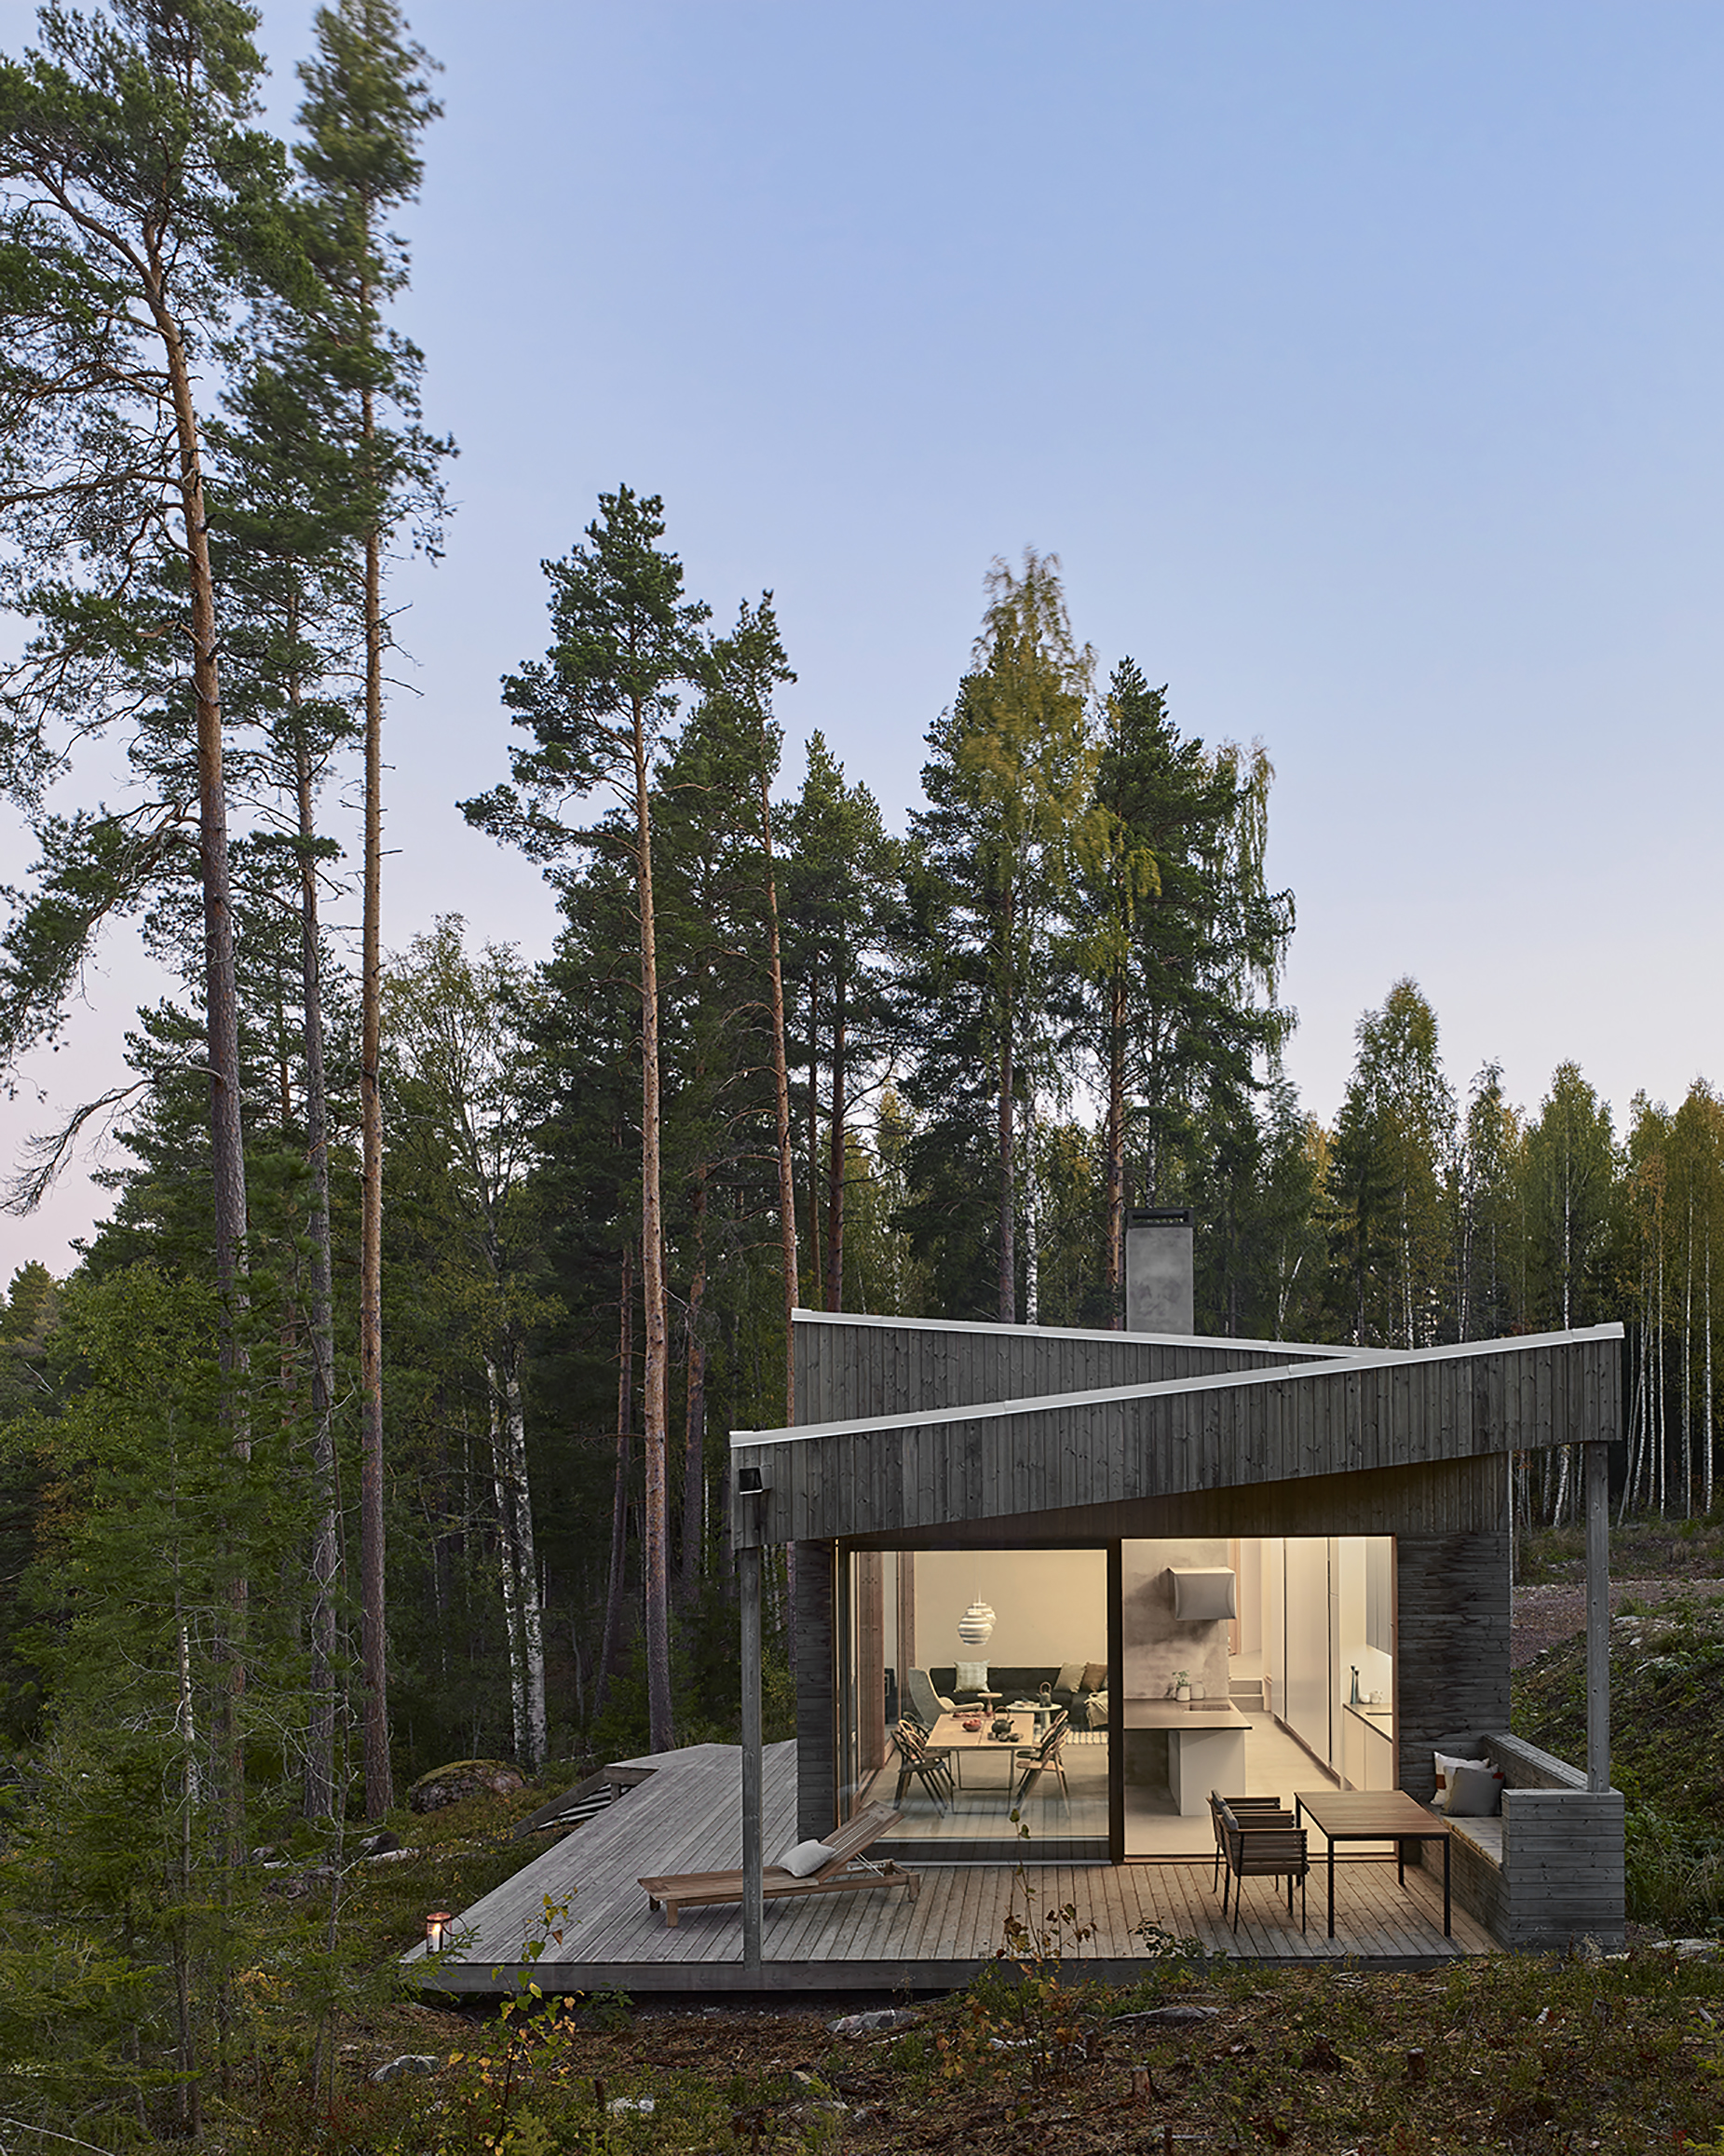 The Dalarna House was designed by Dive Architects. You can enjoy some amazing homes on our website.